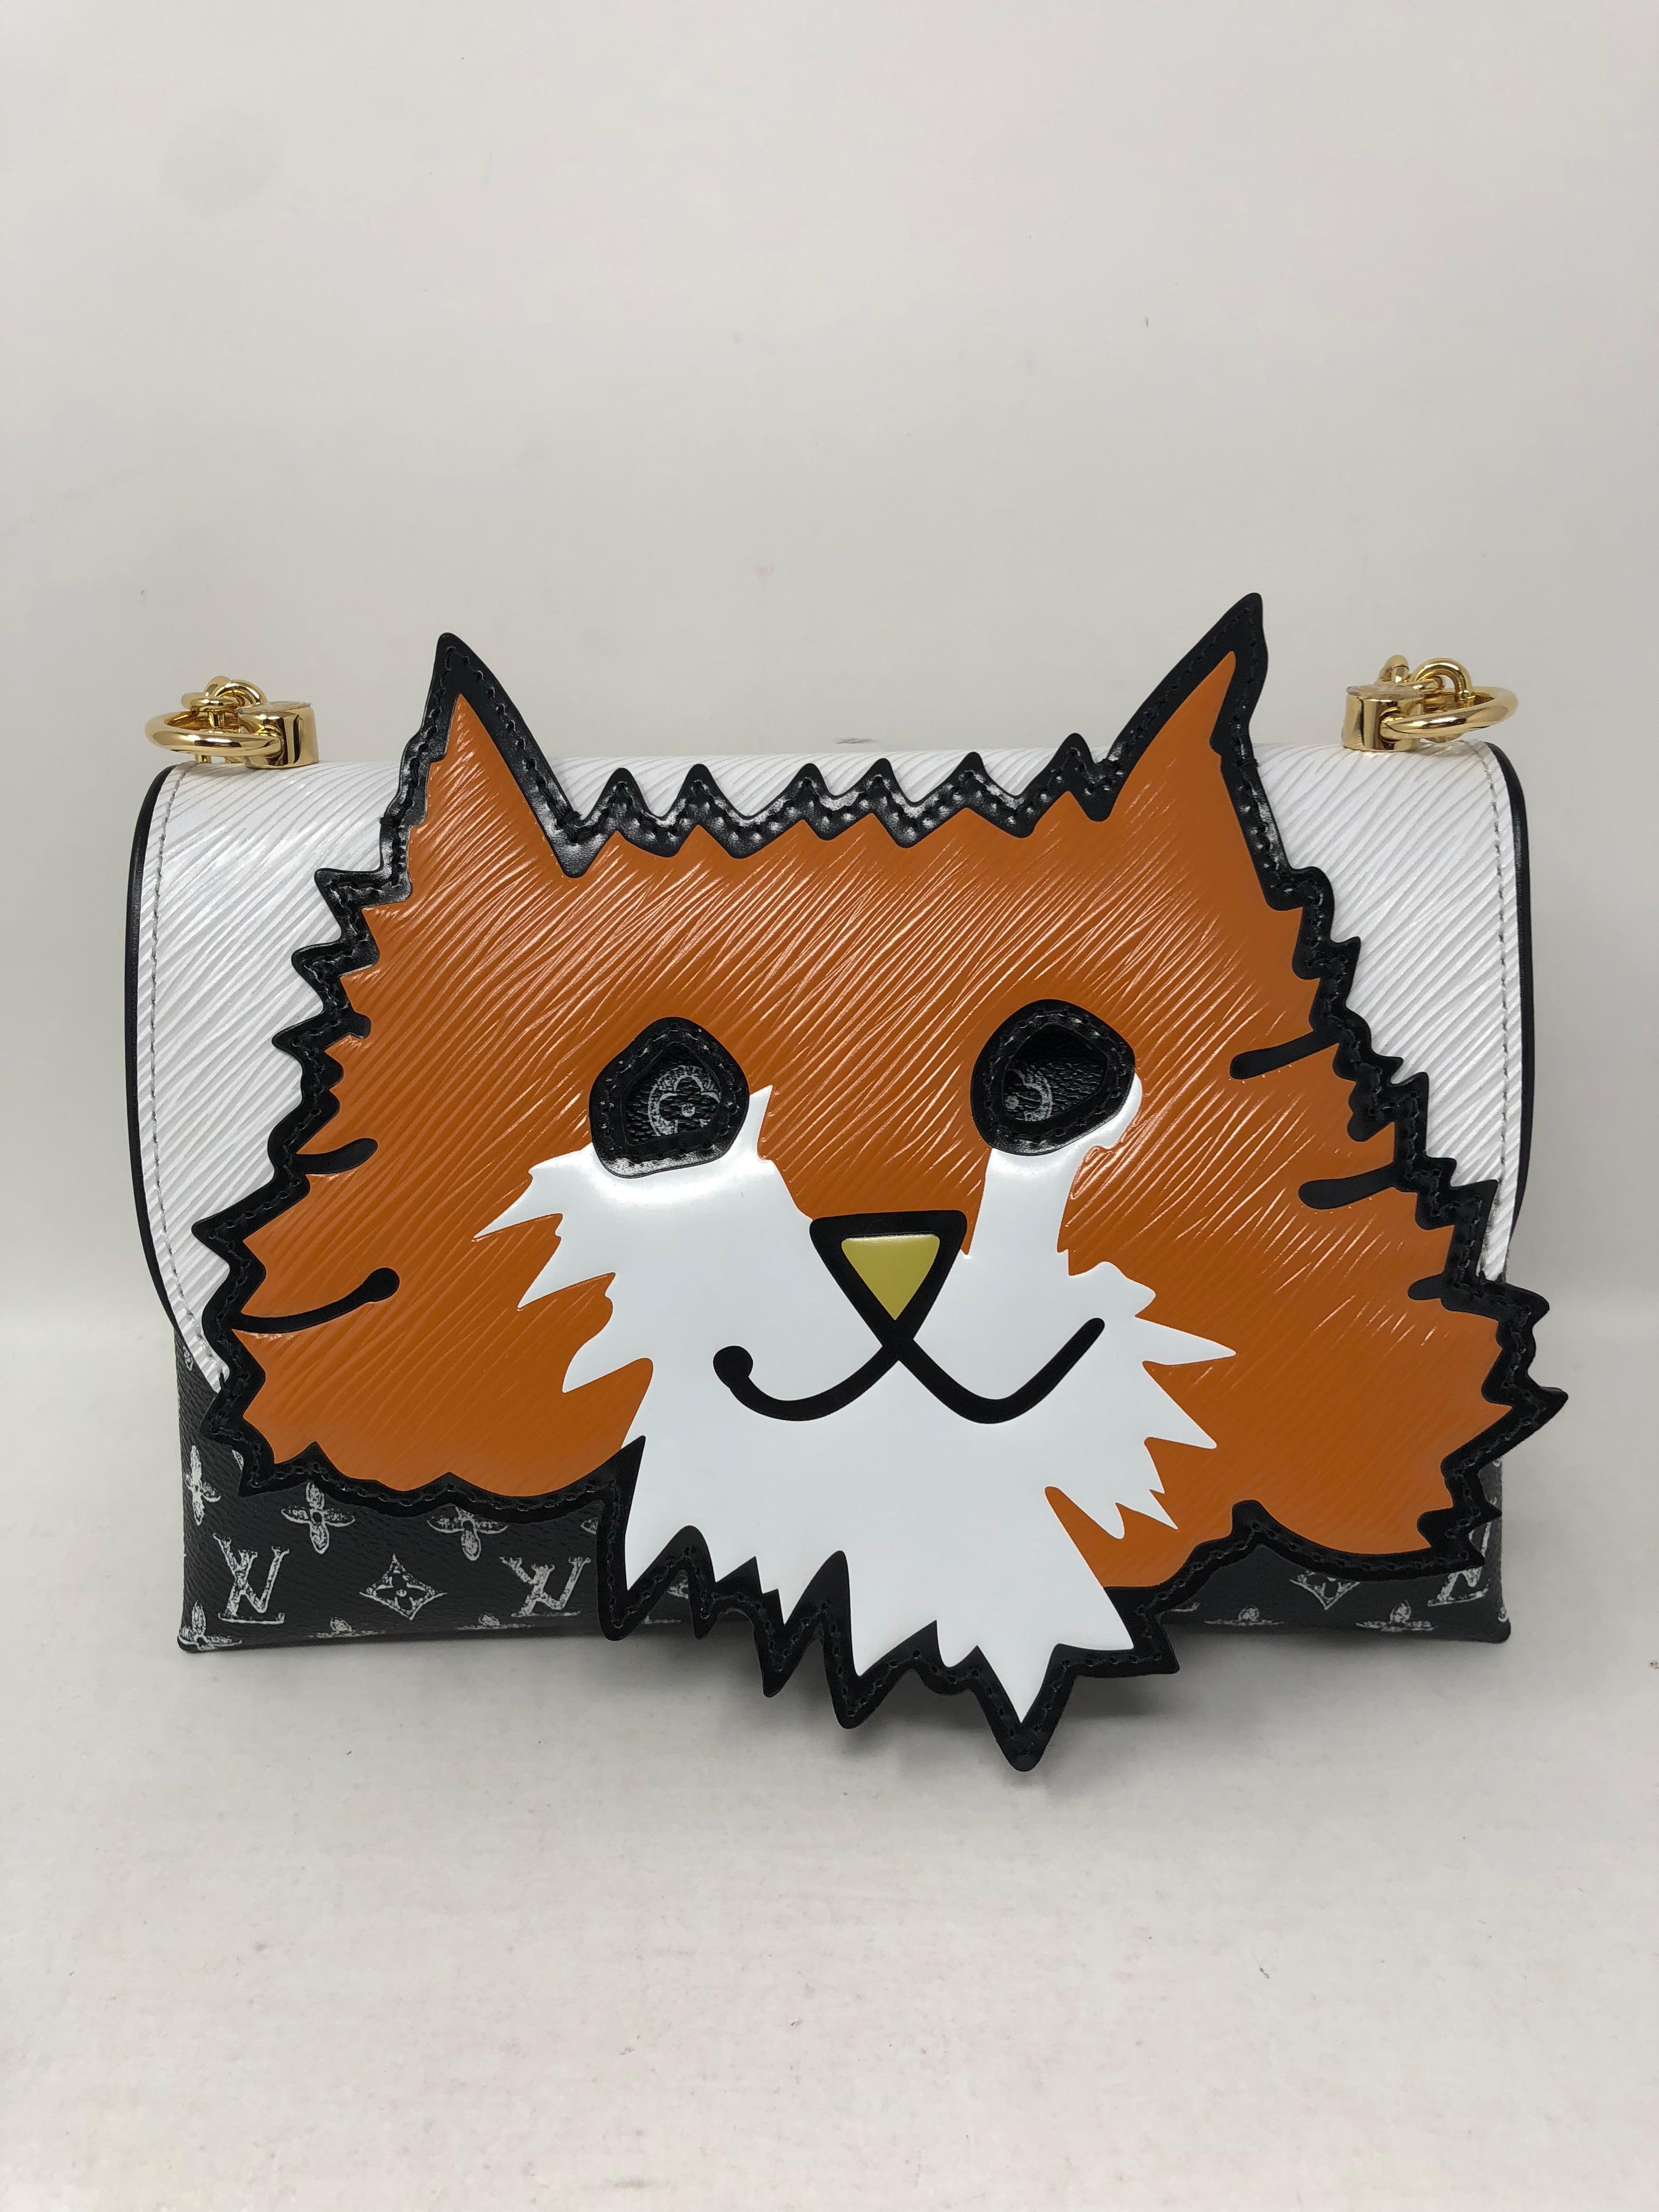 Louis Vuitton Orange Cat Chain Clutch from Grace Coddington Collaboration. From the Cruise 2019 Collection and the hottest bag. Very limited and sold out. This is the true animal lover's dream bag. A wonderful mix of LV signature monogram in indigo